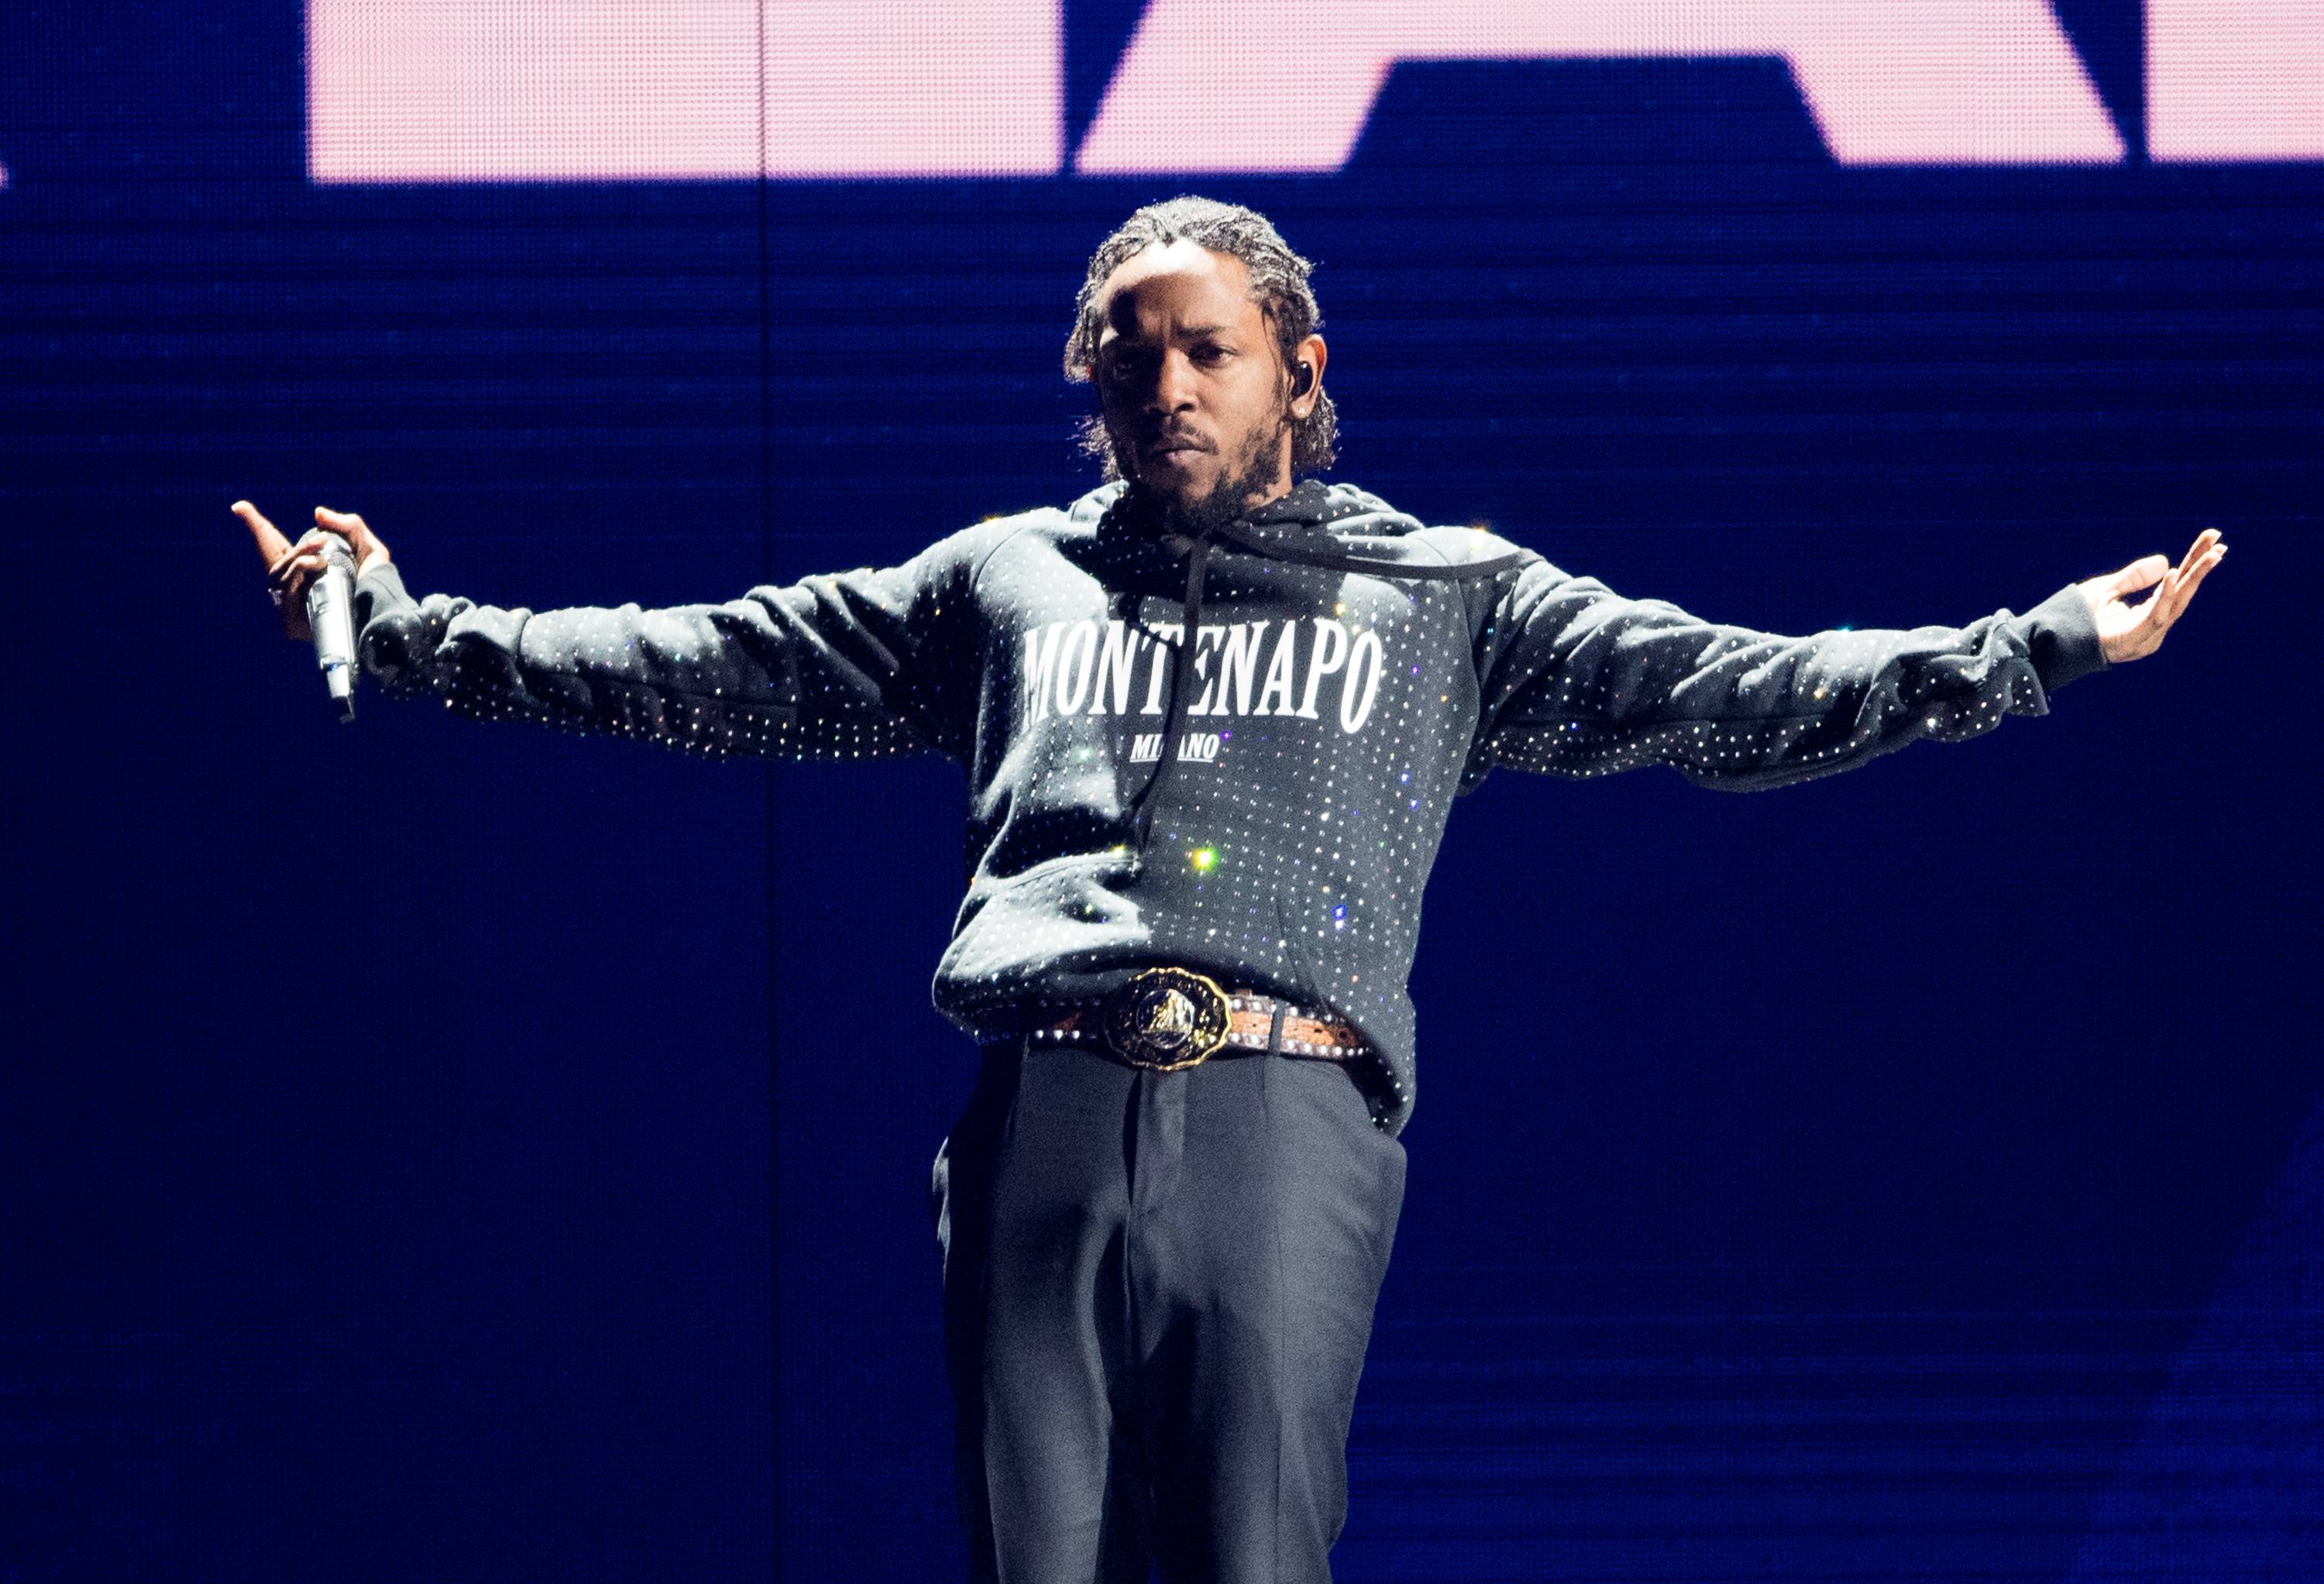 Kendrick Lamar becomes the first rapper to win a Pulitzer for his album "DAMN."